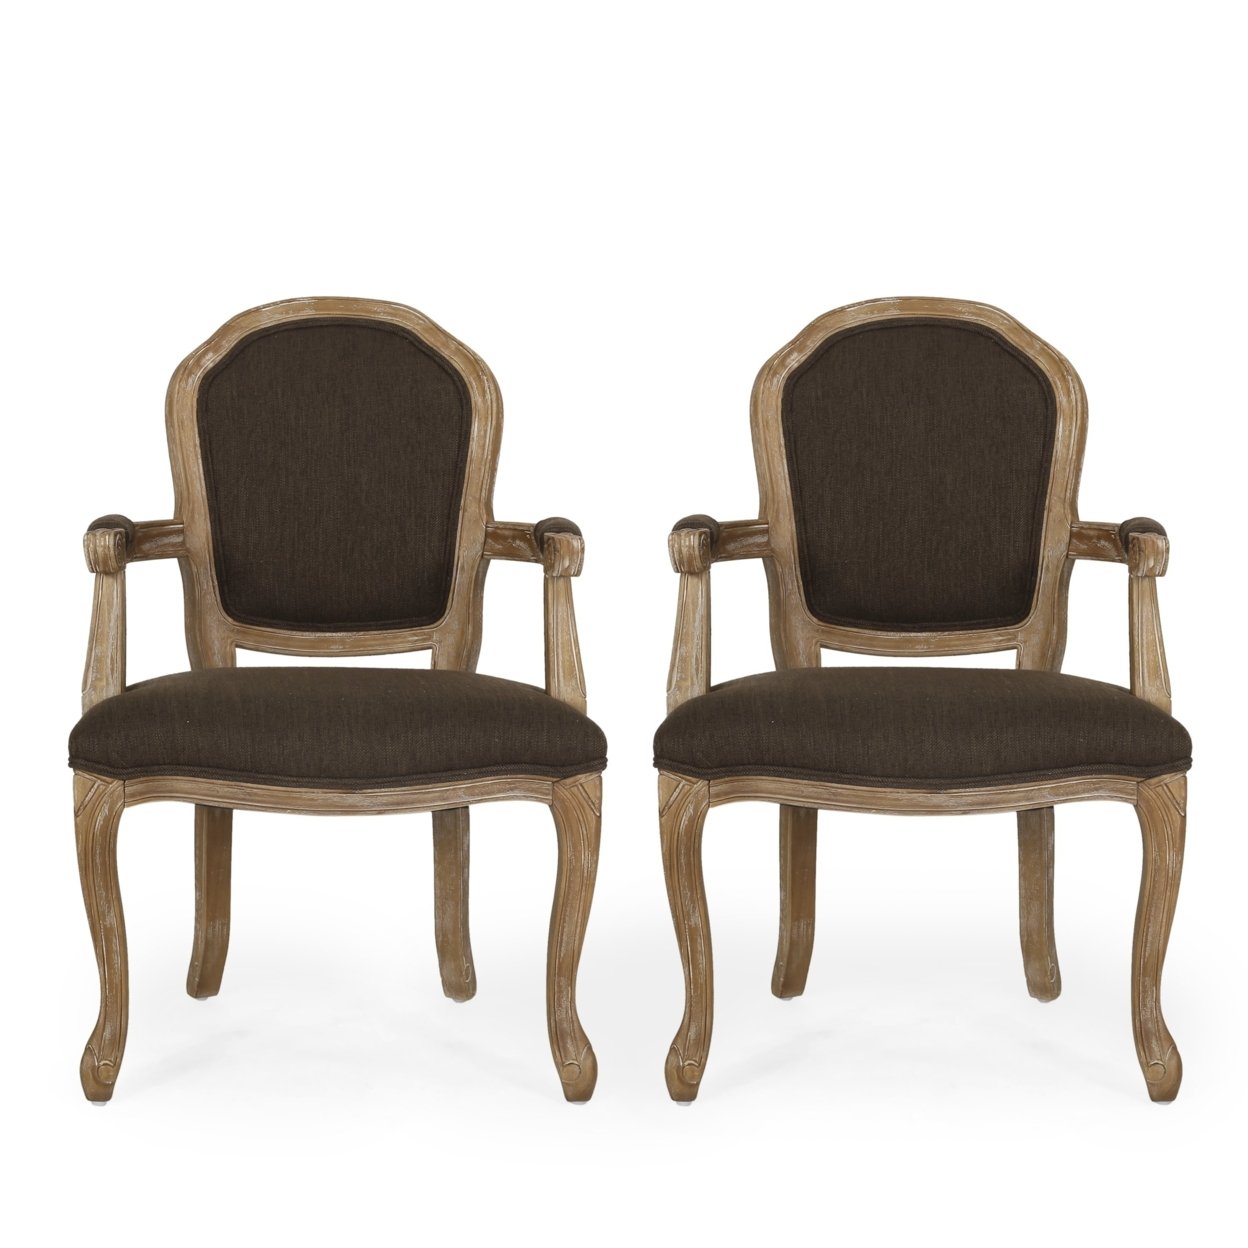 Fairgreens Traditional Upholstered Dining Chairs, Set Of 2 - Brown